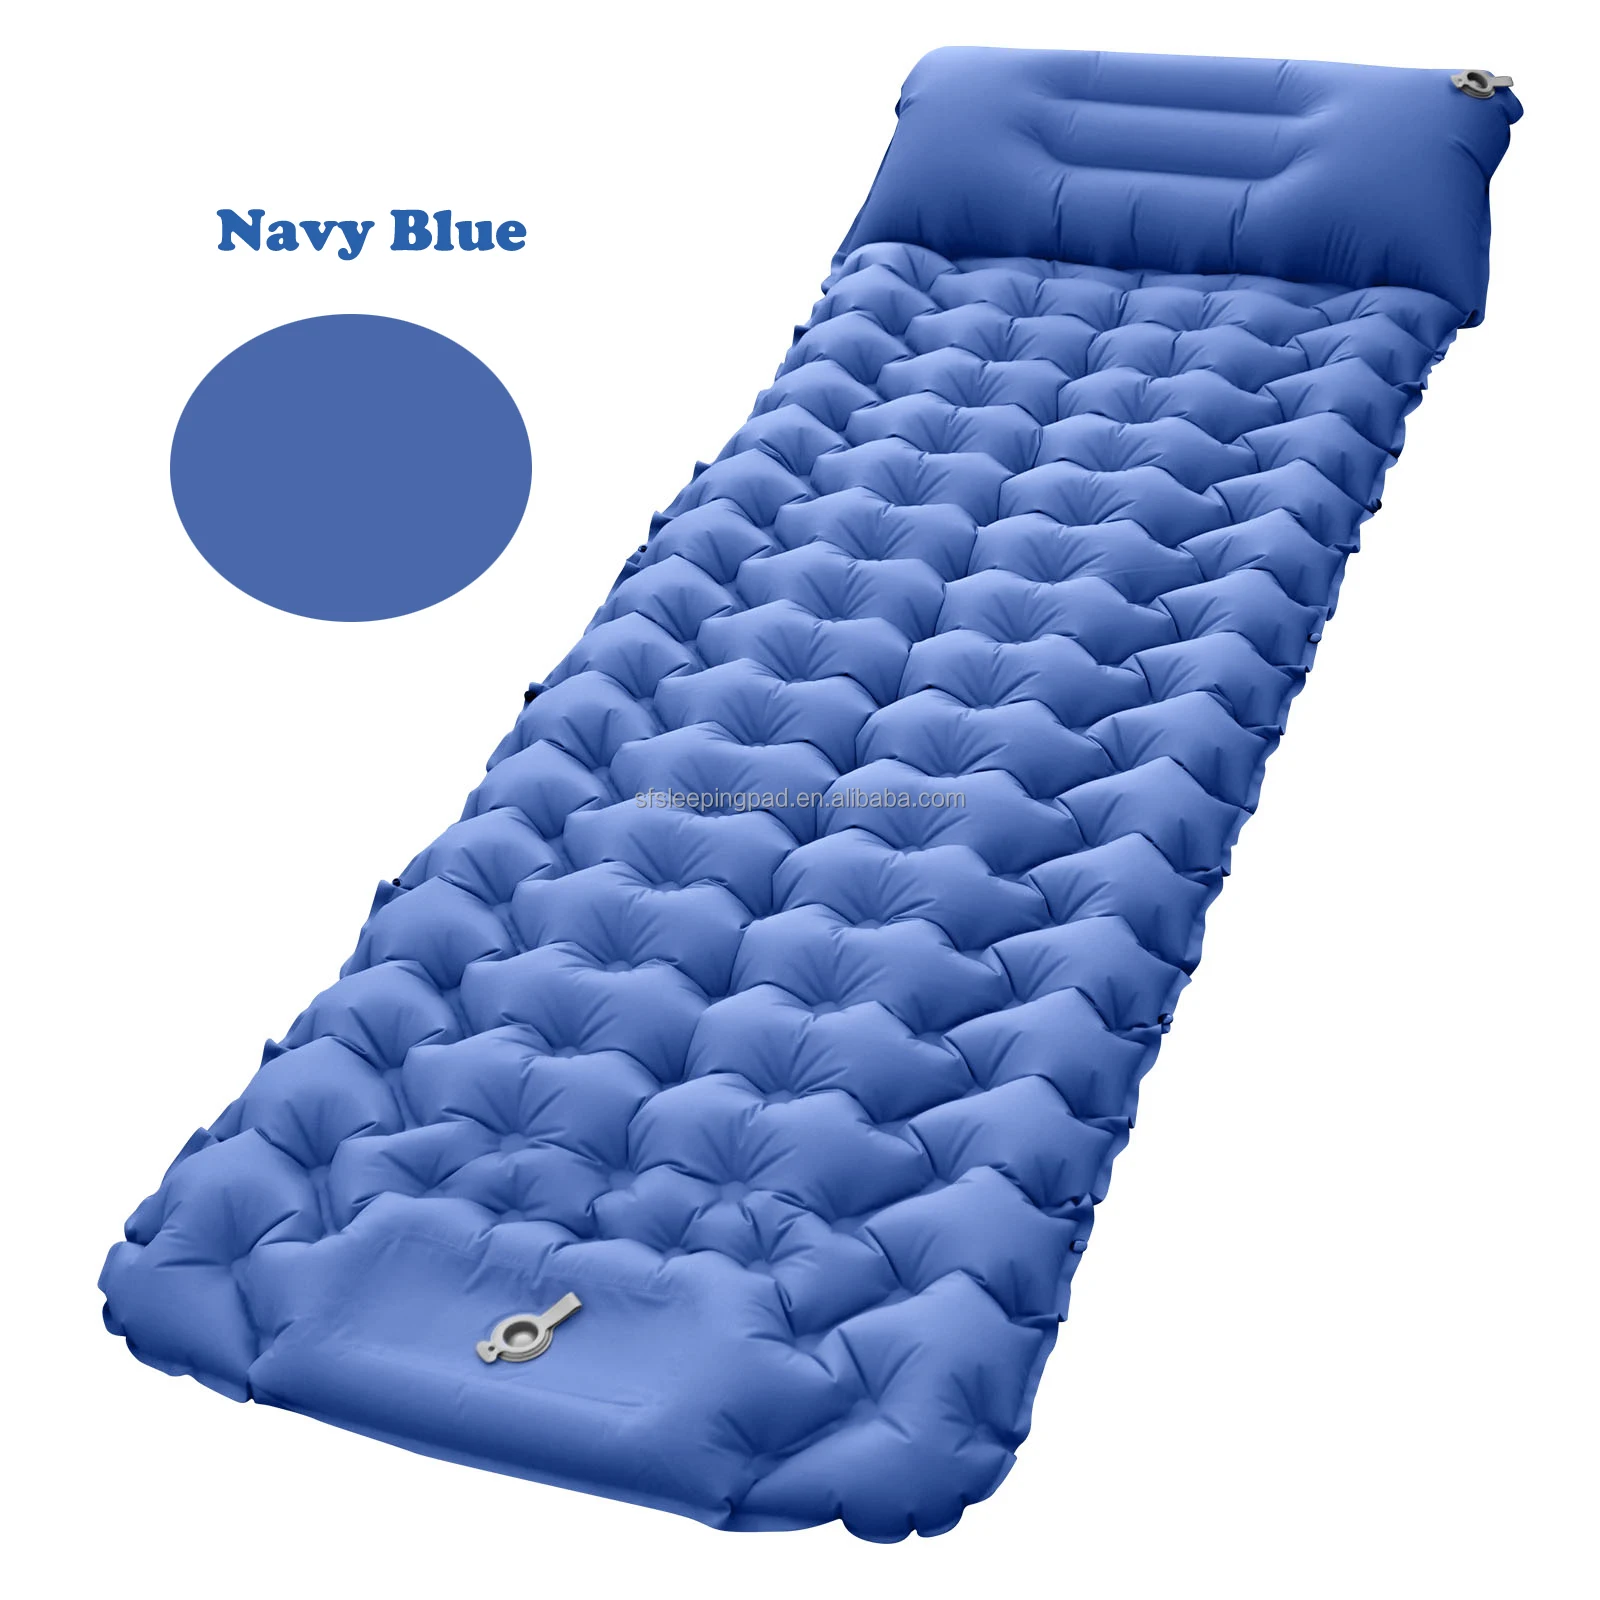 

Super Quality 25S Quick Inflate Compact Inflatable Camping Air Mattress Foldable Self-inflating Sleeping Pad with Built-in Pump, Multiple colour and accept customization